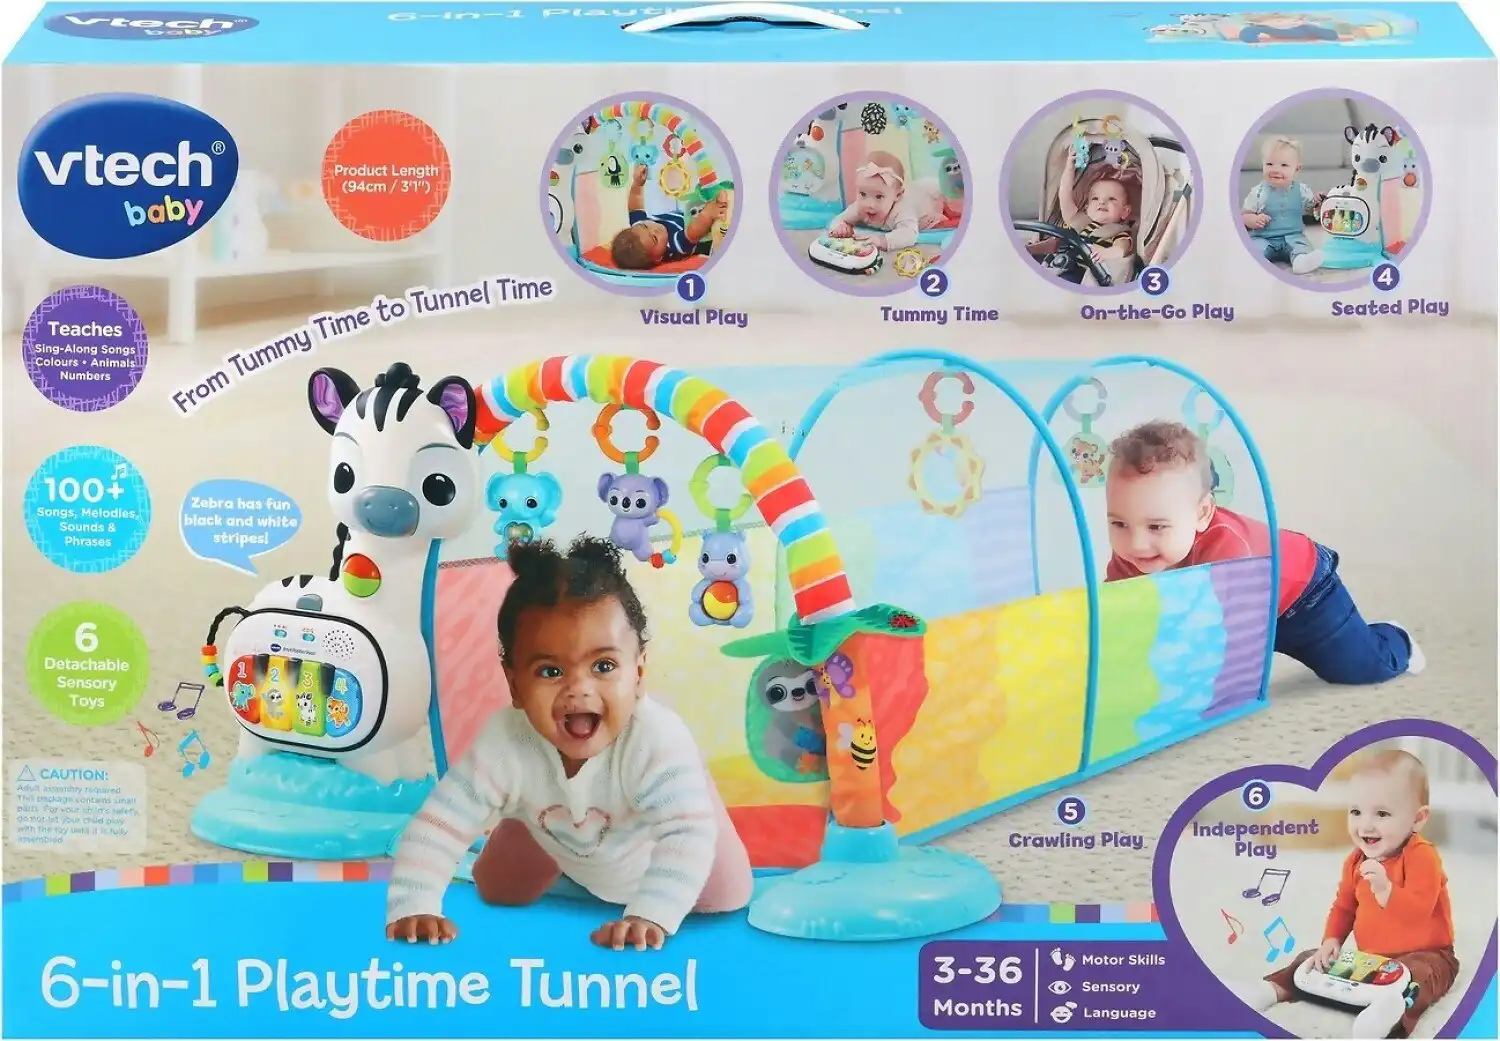 VTech - 6-in-1 Playtime Tunnel